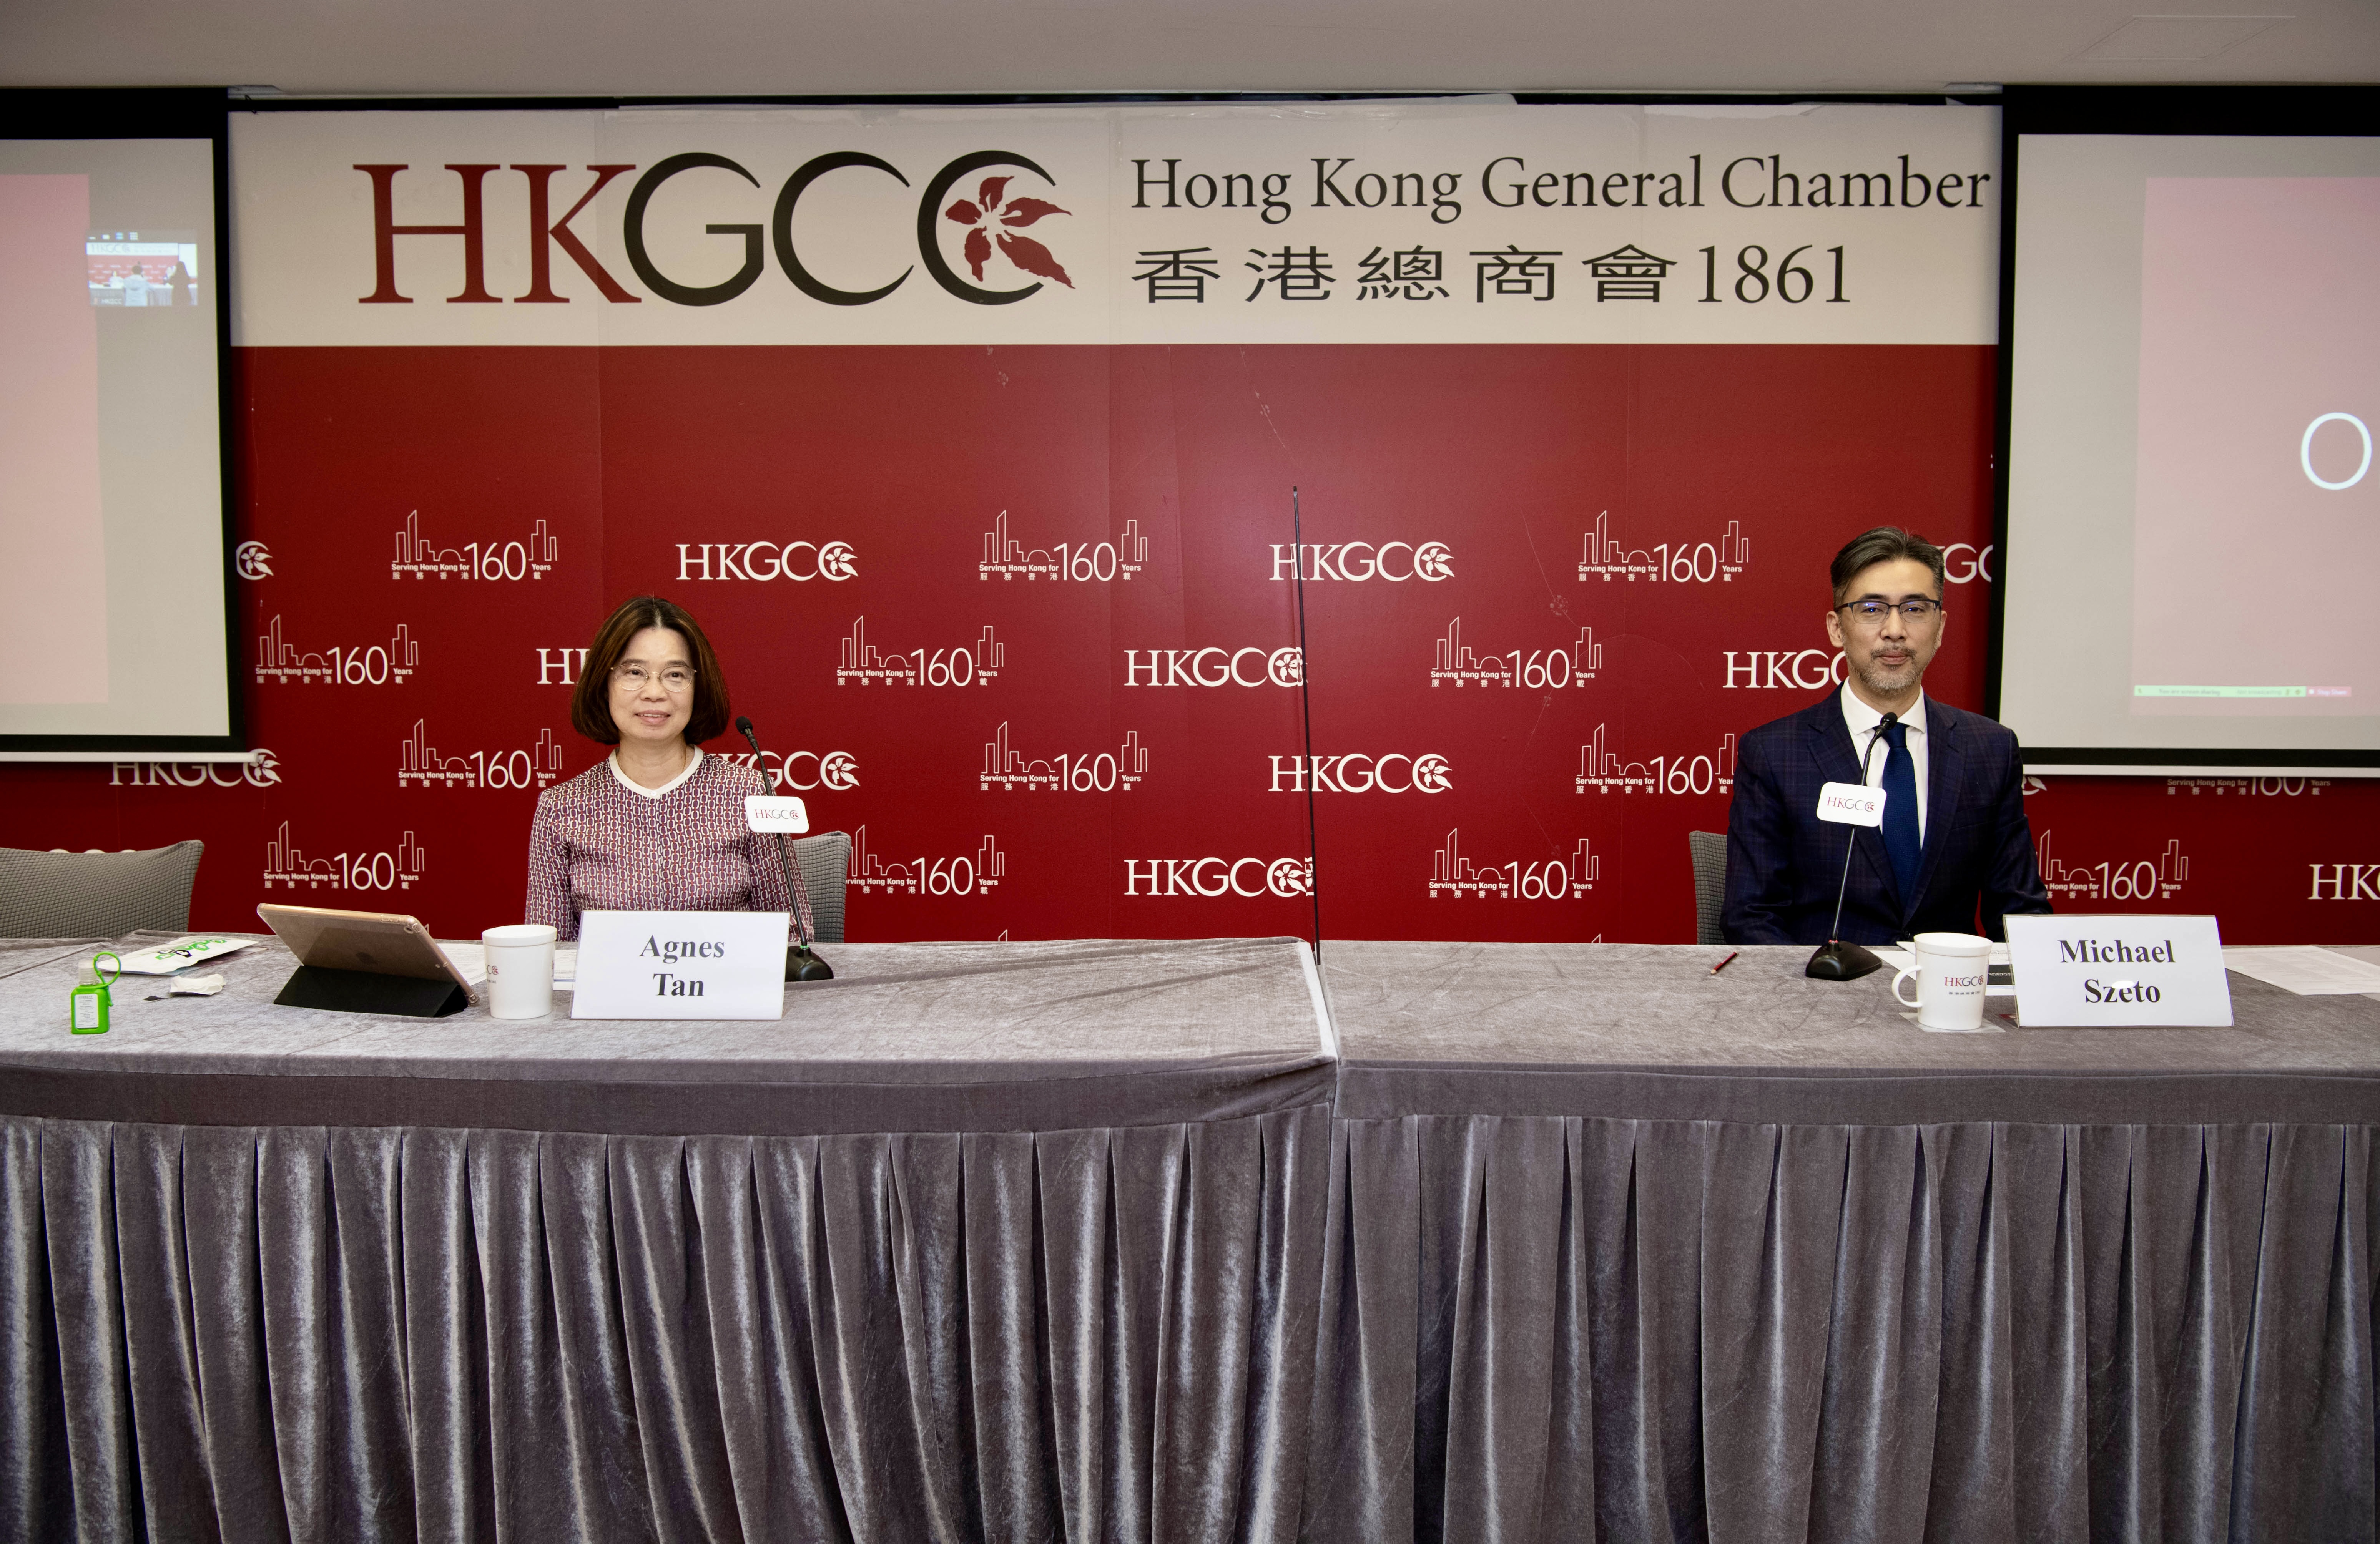 Michael Szeto of ONC Lawyers presented a webinar for HKGCC on employment law issues in economic downturn